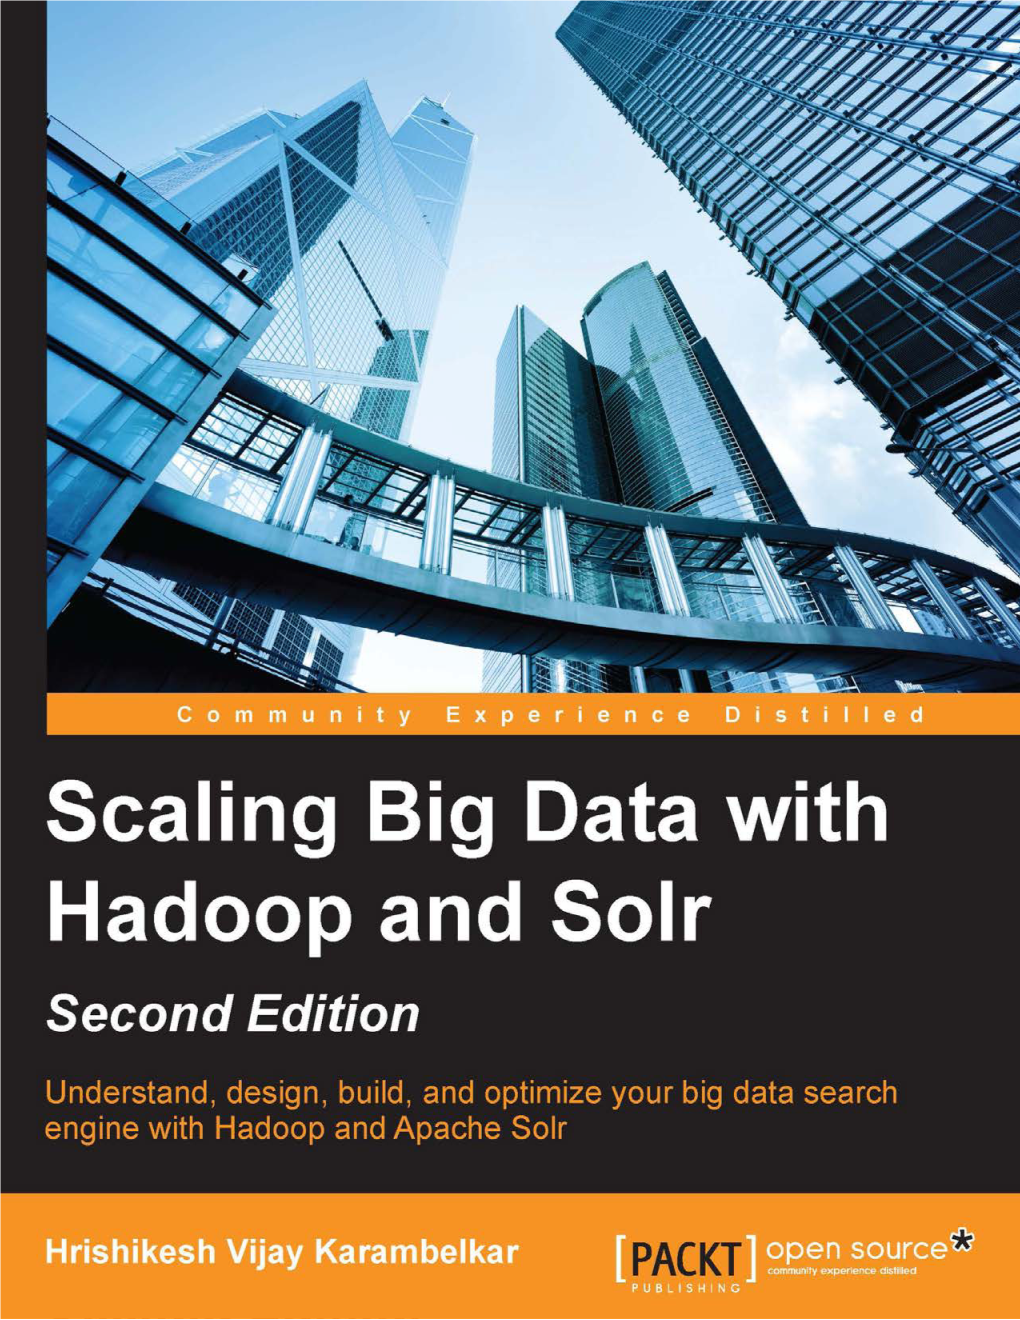 Scaling Big Data with Hadoop and Solr Second Edition.Pdf